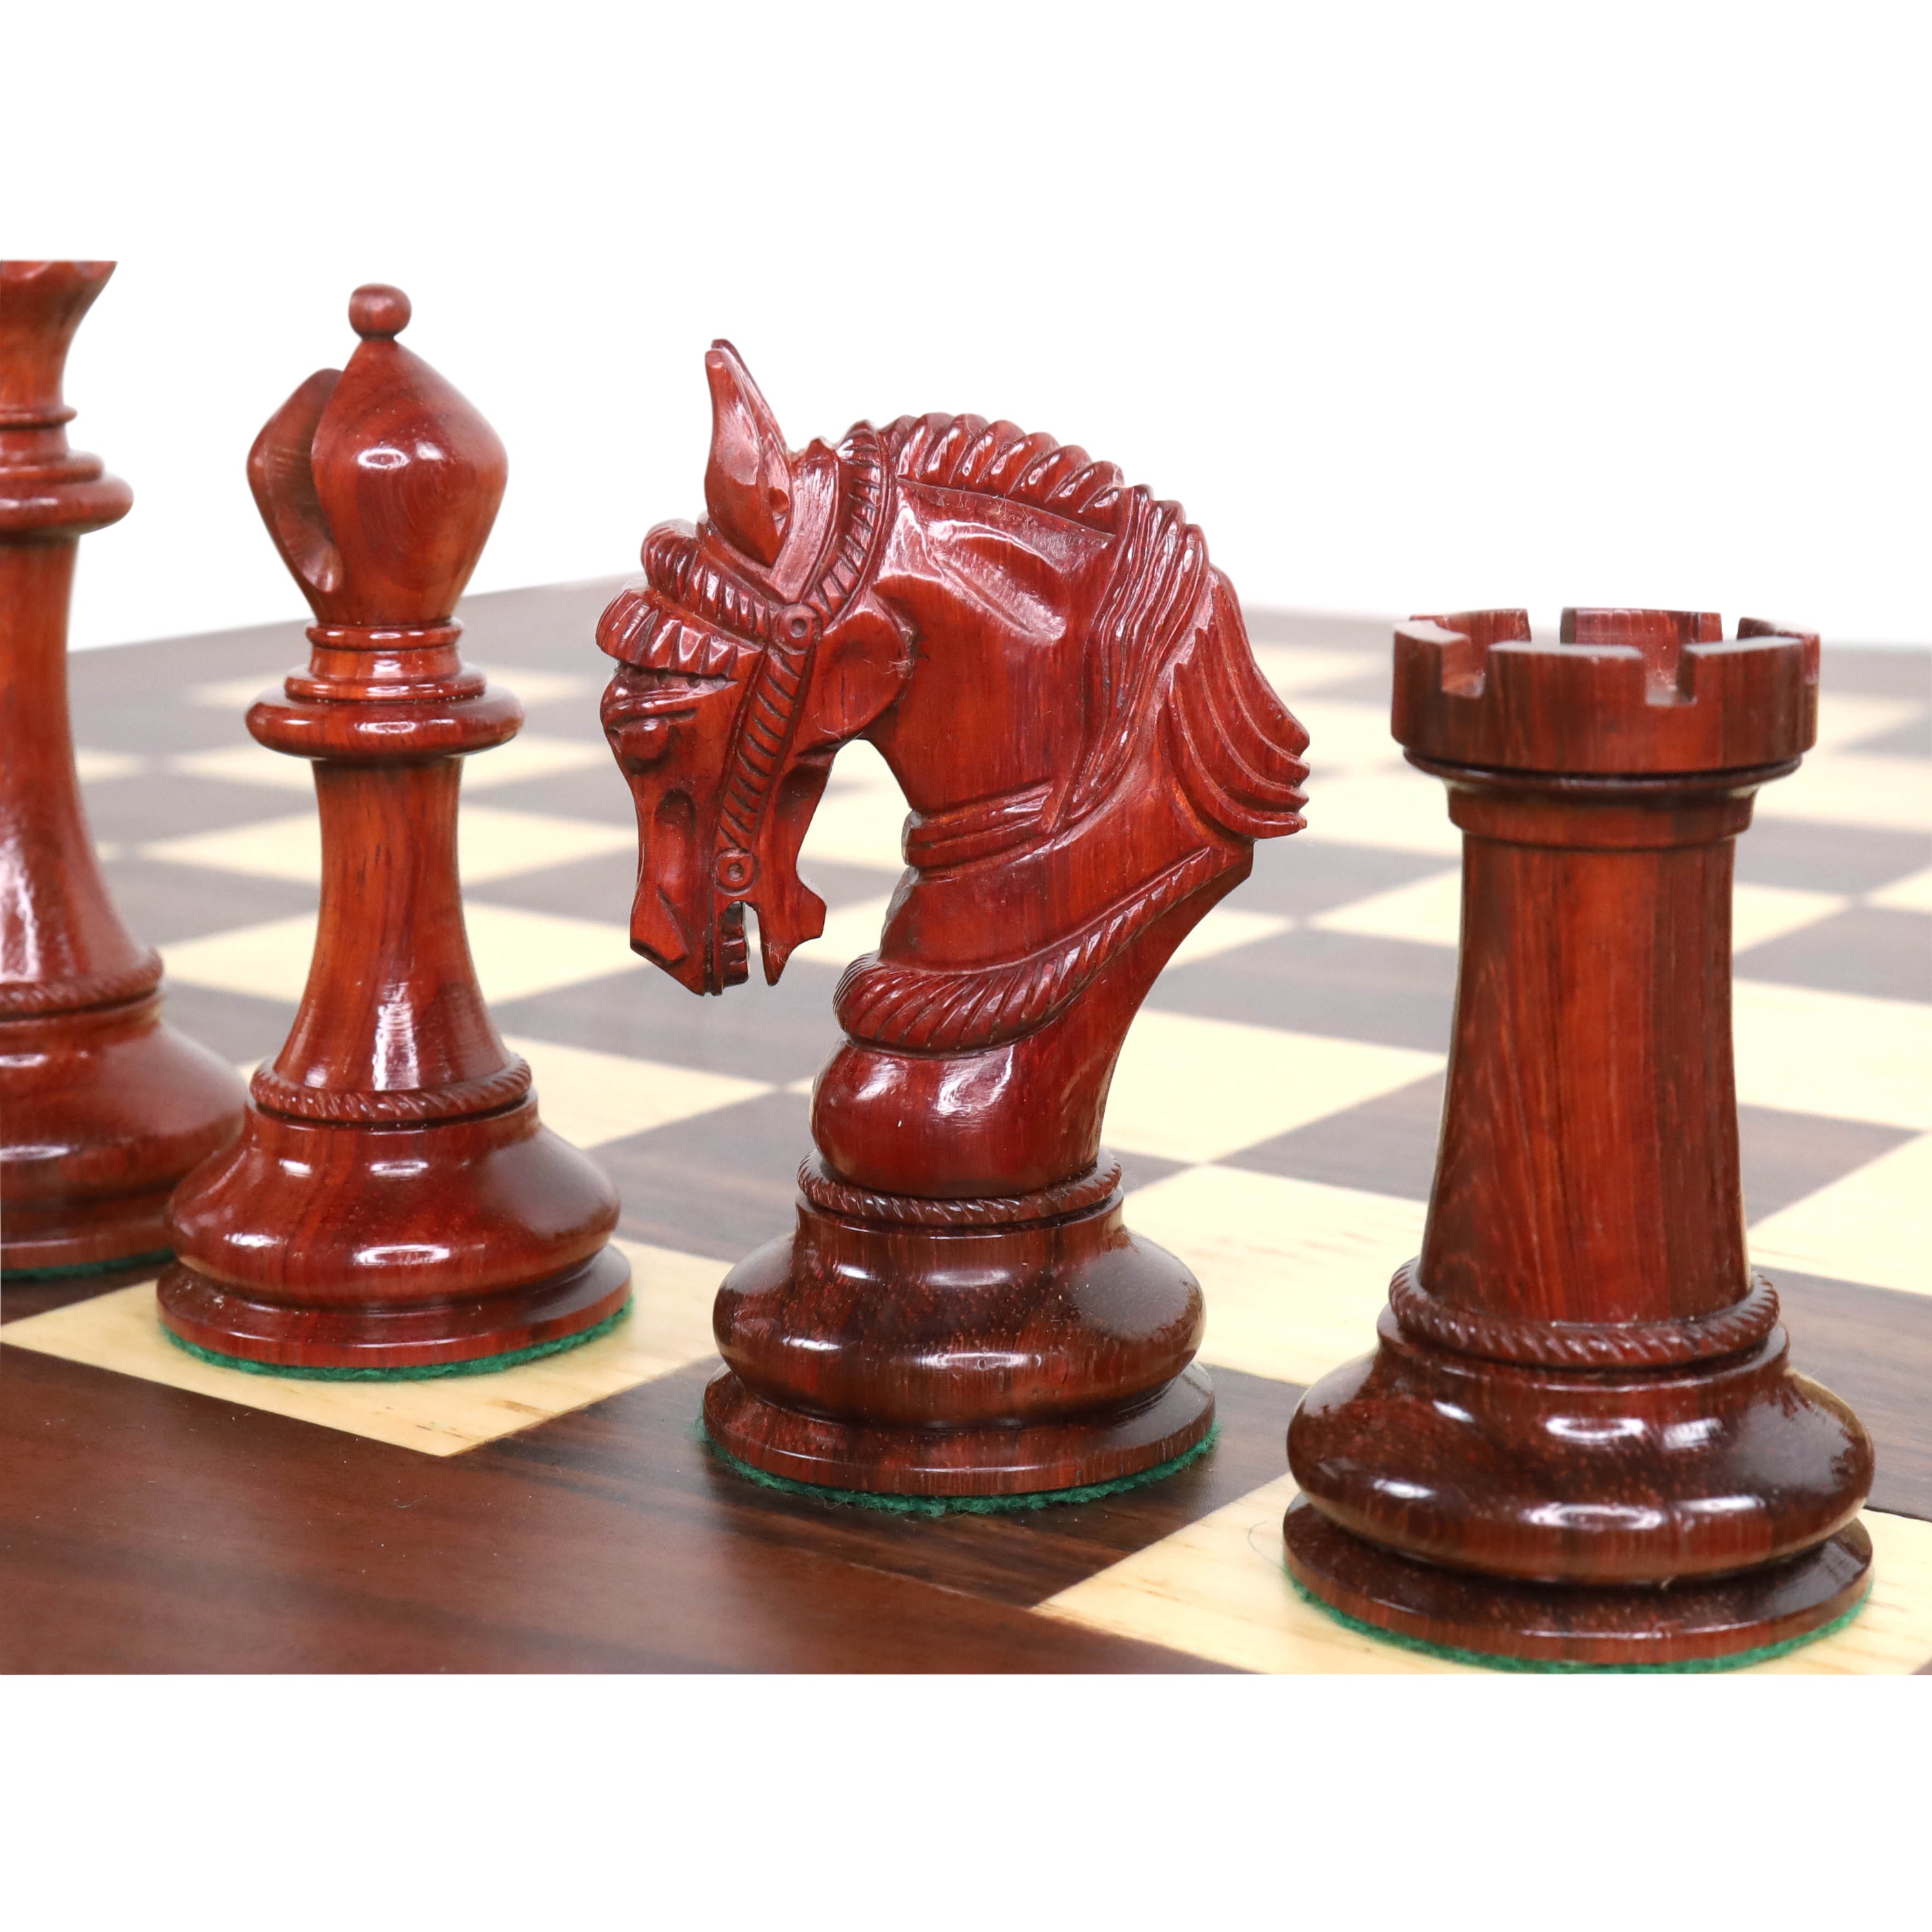 4.5" Imperator Luxury Staunton Chess Pieces Only Set-Bud Rosewood -Triple Weight